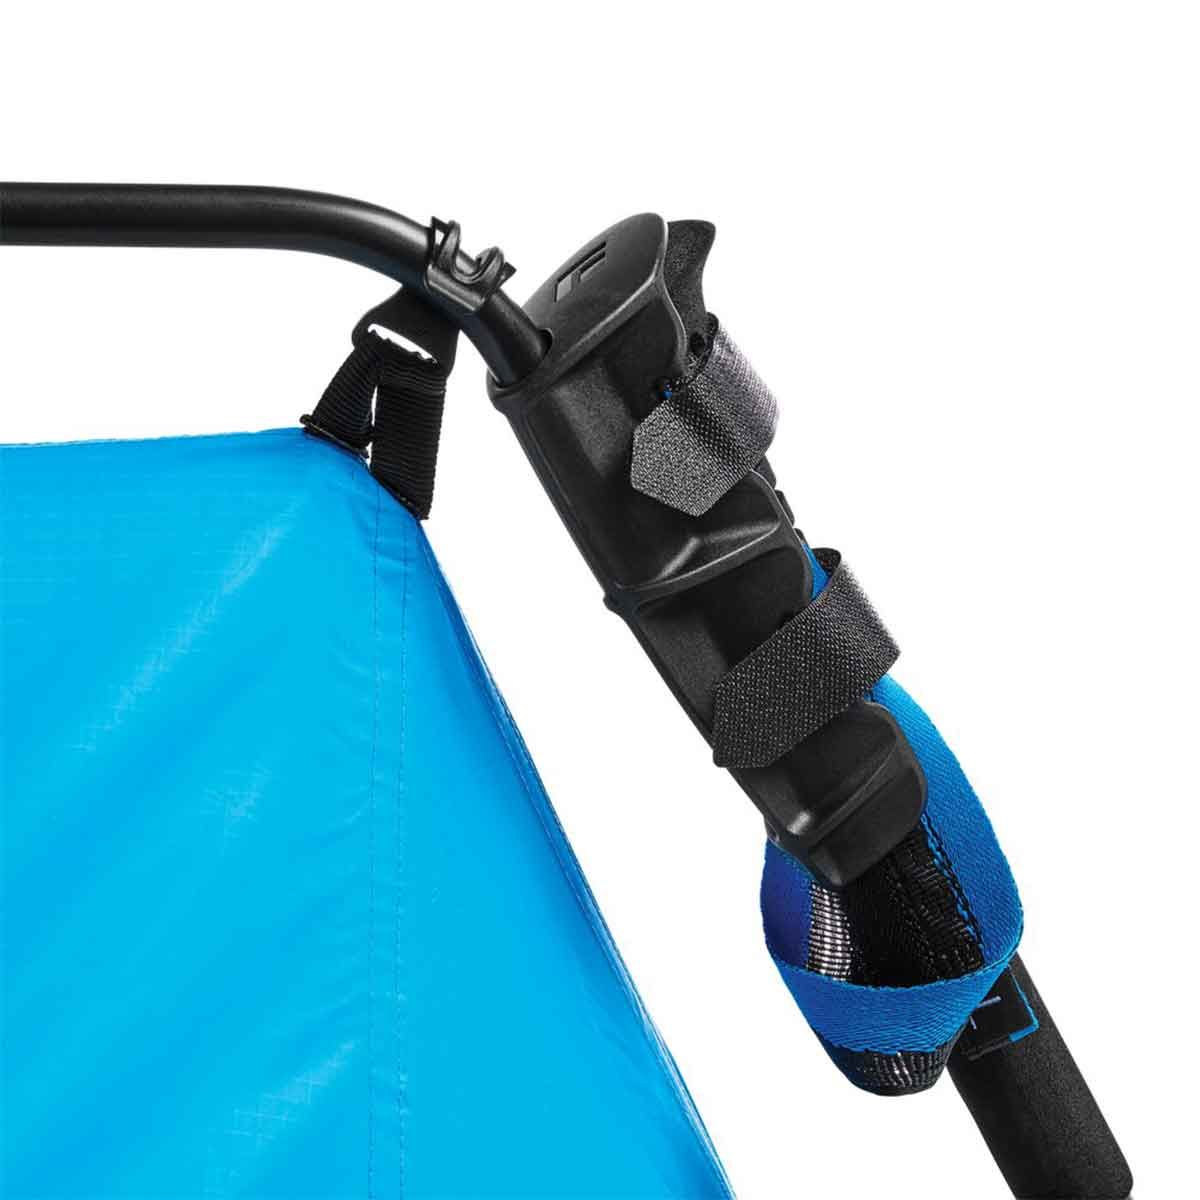 Black Diamond Distance Tent with adapter